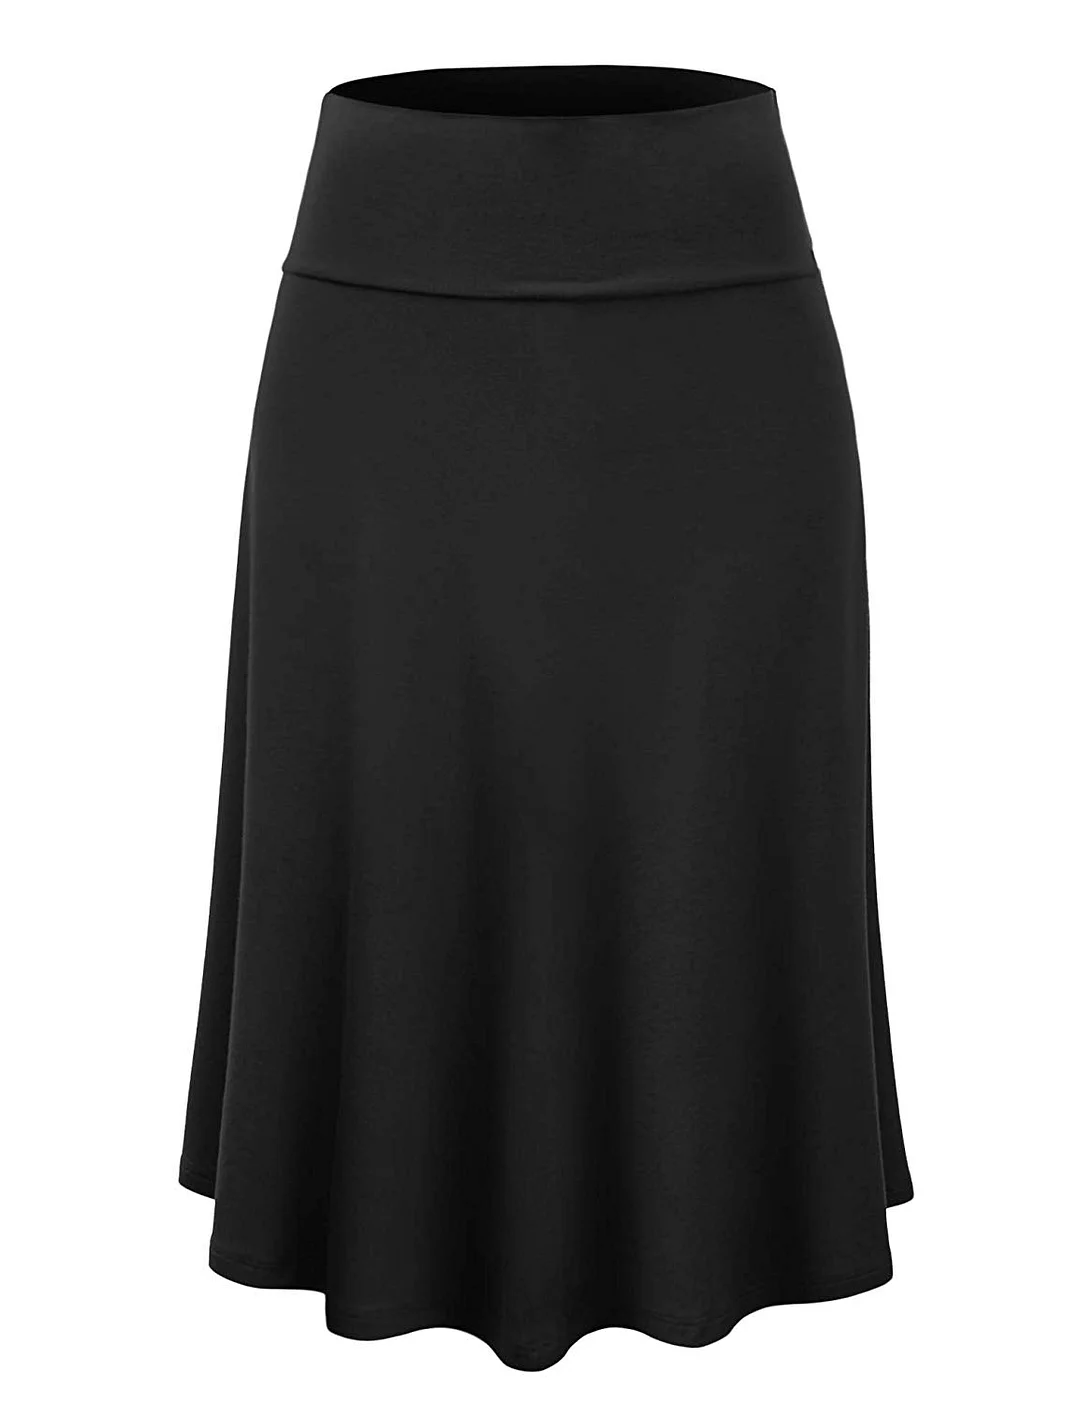 Plus Size Women's Solid Ombre Lightweight Flare Midi Pull On Closure Skirt S-XXXL